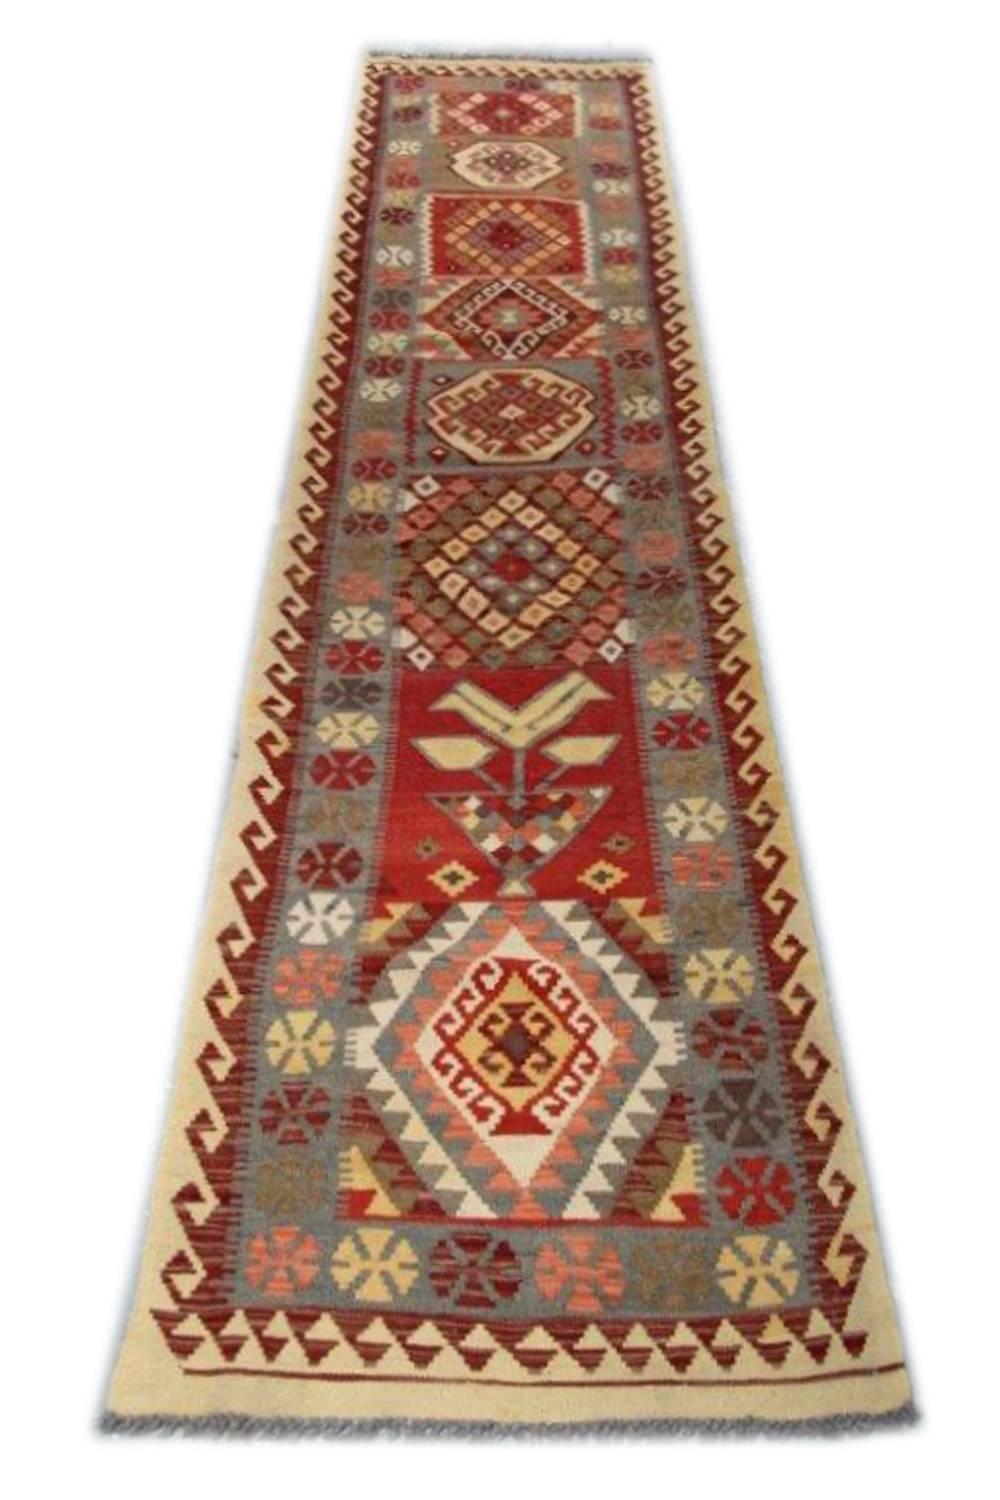 This geometric runner rug has been handmade in Afghanistan by Uzbek and Turkman tribes by using high-quality wool and cotton. Also, the dyes are organic. The geometric designs are inspired by the Persian Qashqai tribe and are multicolored.